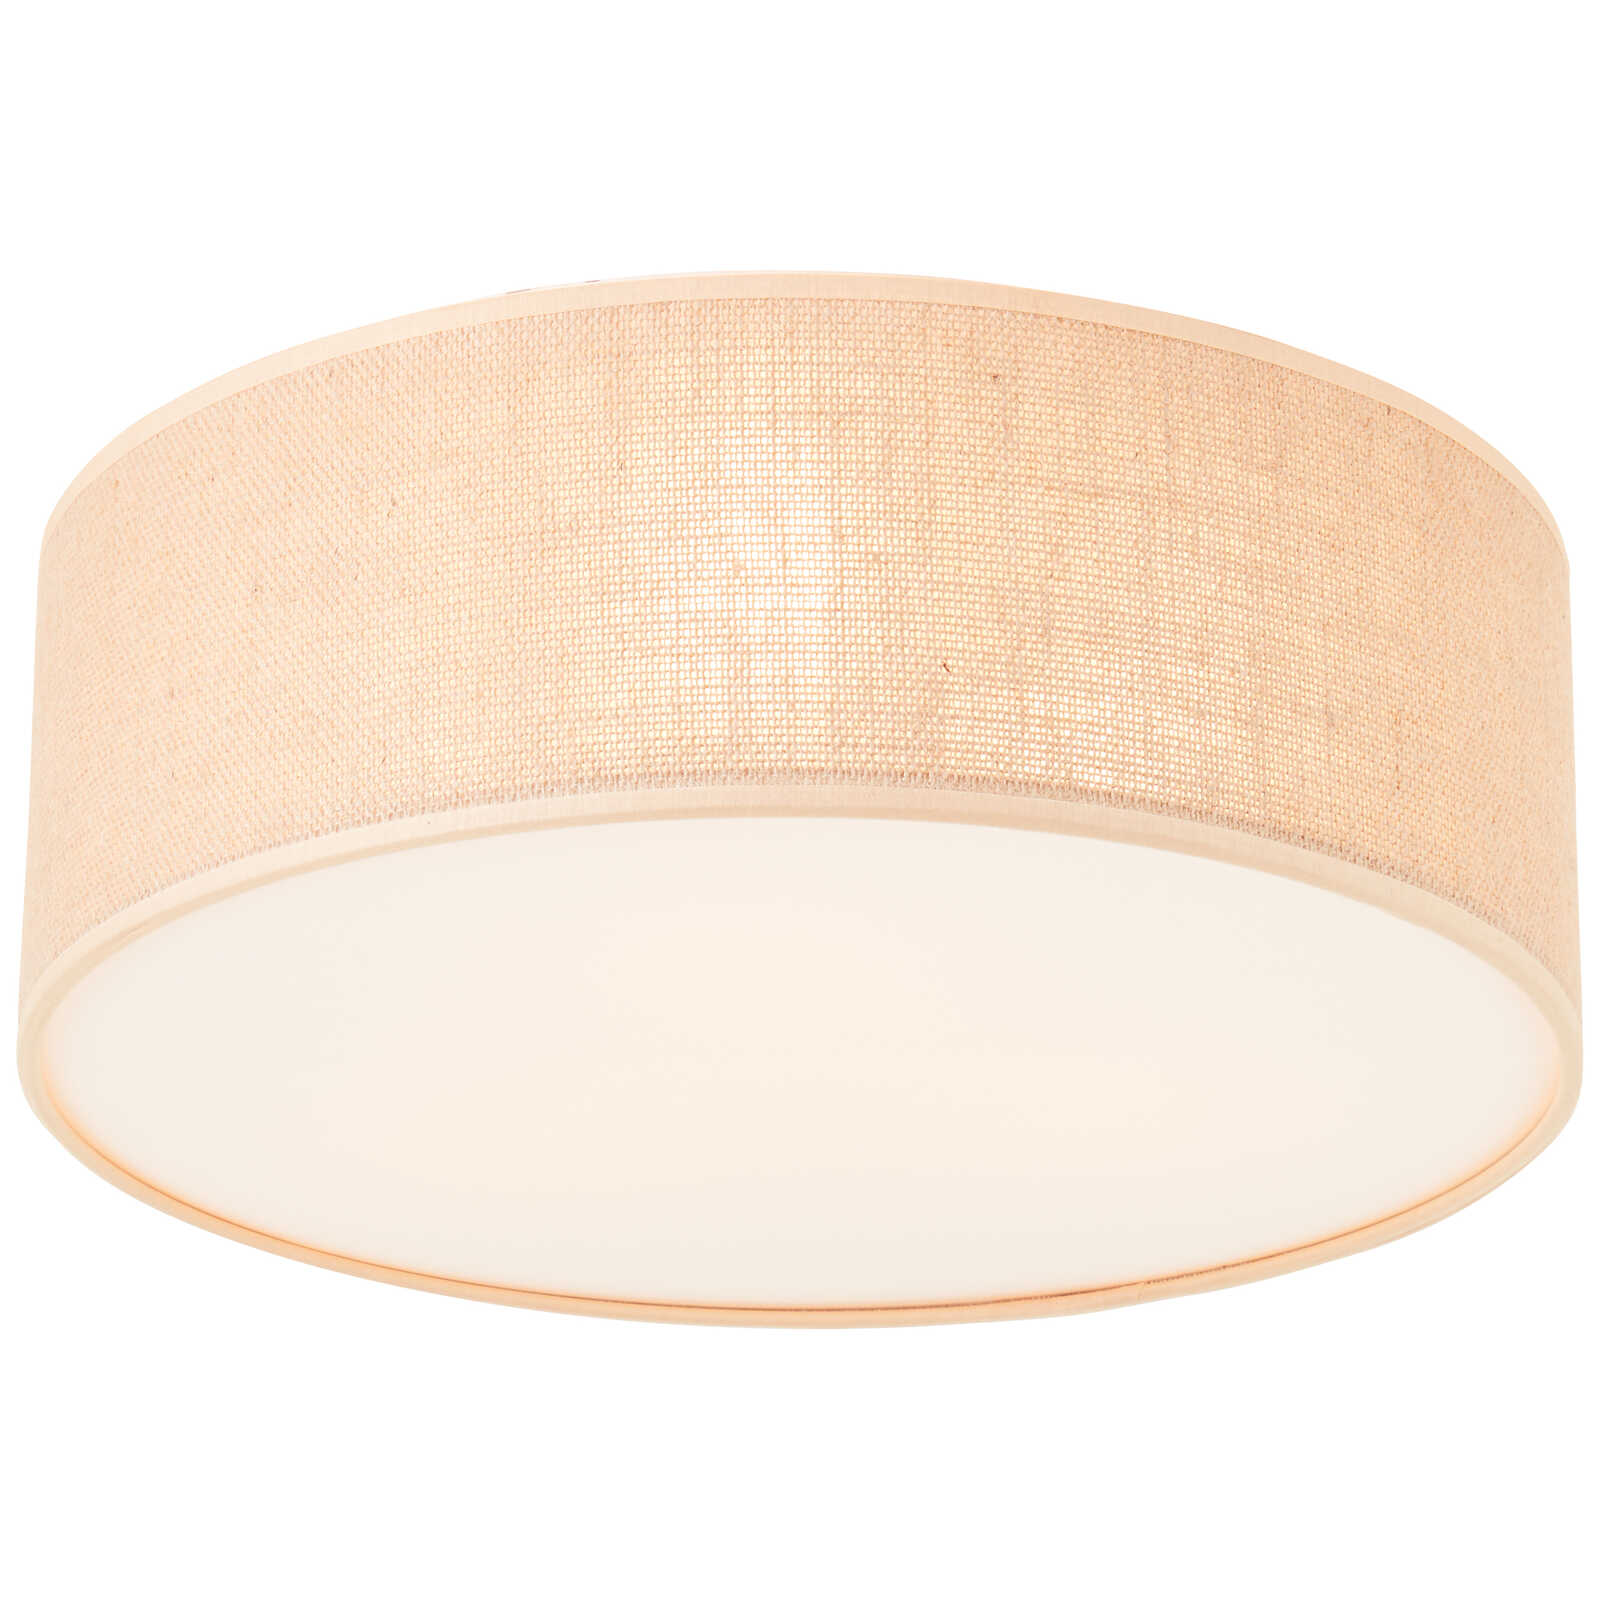             Textile ceiling light - Alicia 3 - Brown
        